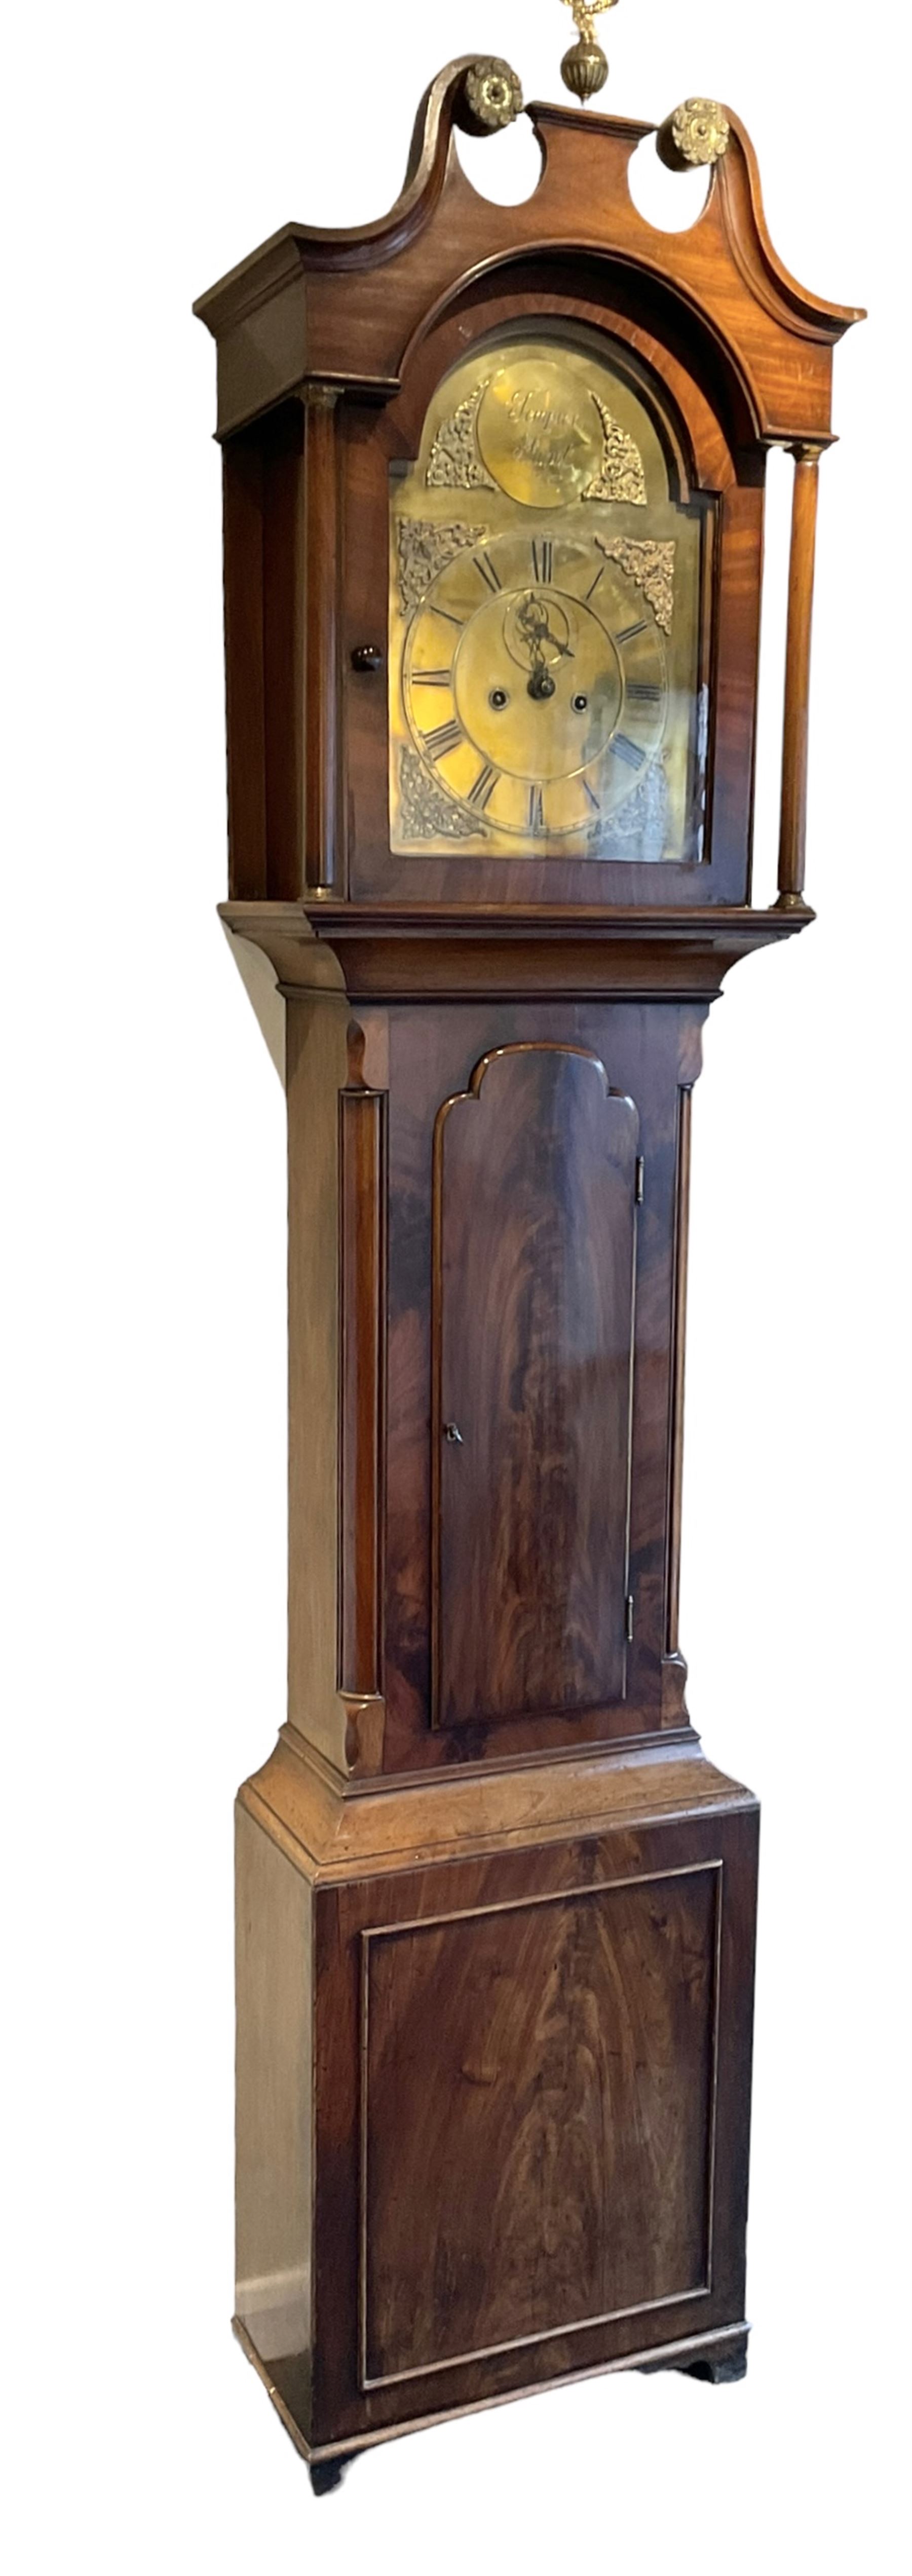 Mahogany - longcase clock with an eight day movement and brass dial - Image 2 of 12